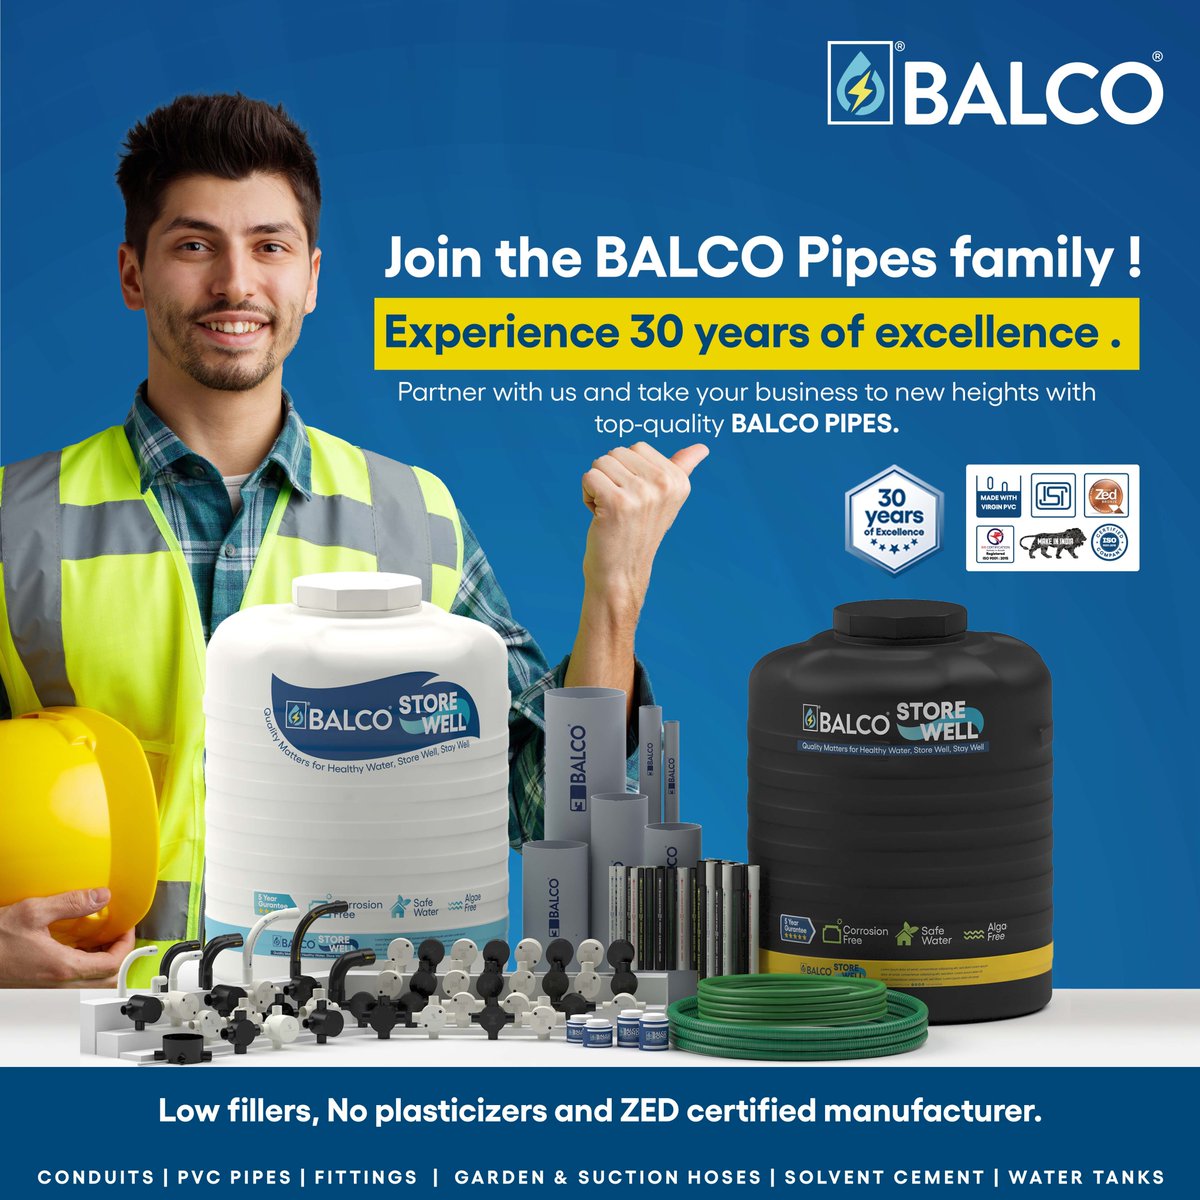 Unlock the full potential of your projects with BALCO Pipes' diverse product range. From electrical conduits to garden hoses and everything in between, we've got you covered. #BALCOPipes #ConstructionMaterials #balco #pipes #electrical #plumbing #strong #home #safehome #construct